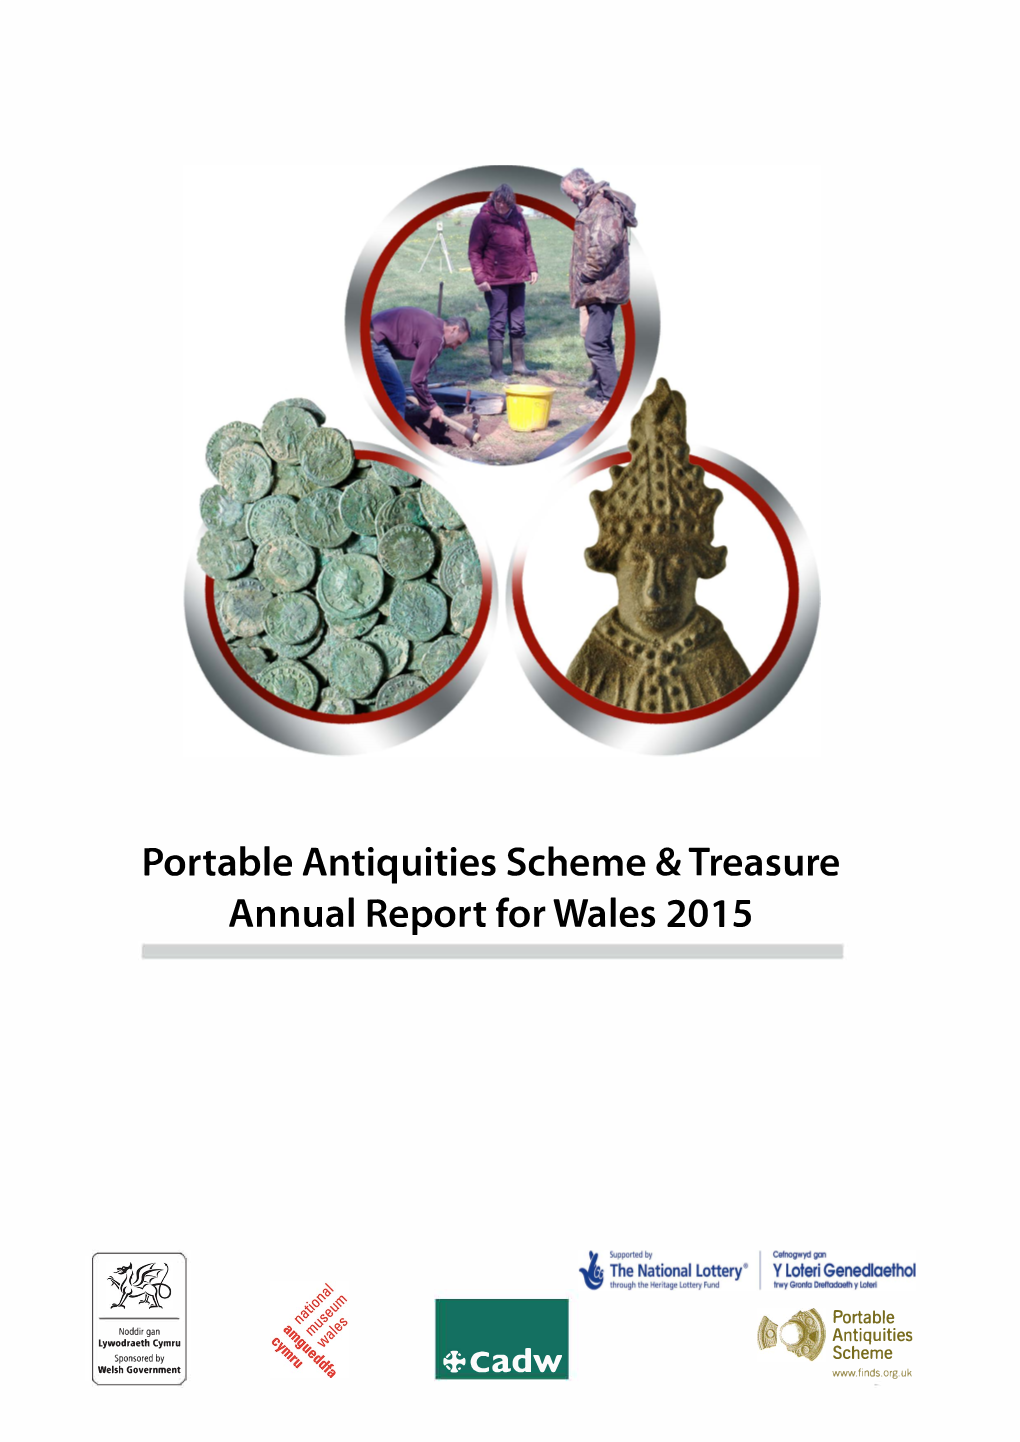 Portable Antiquities Scheme & Treasure Annual Report for Wales